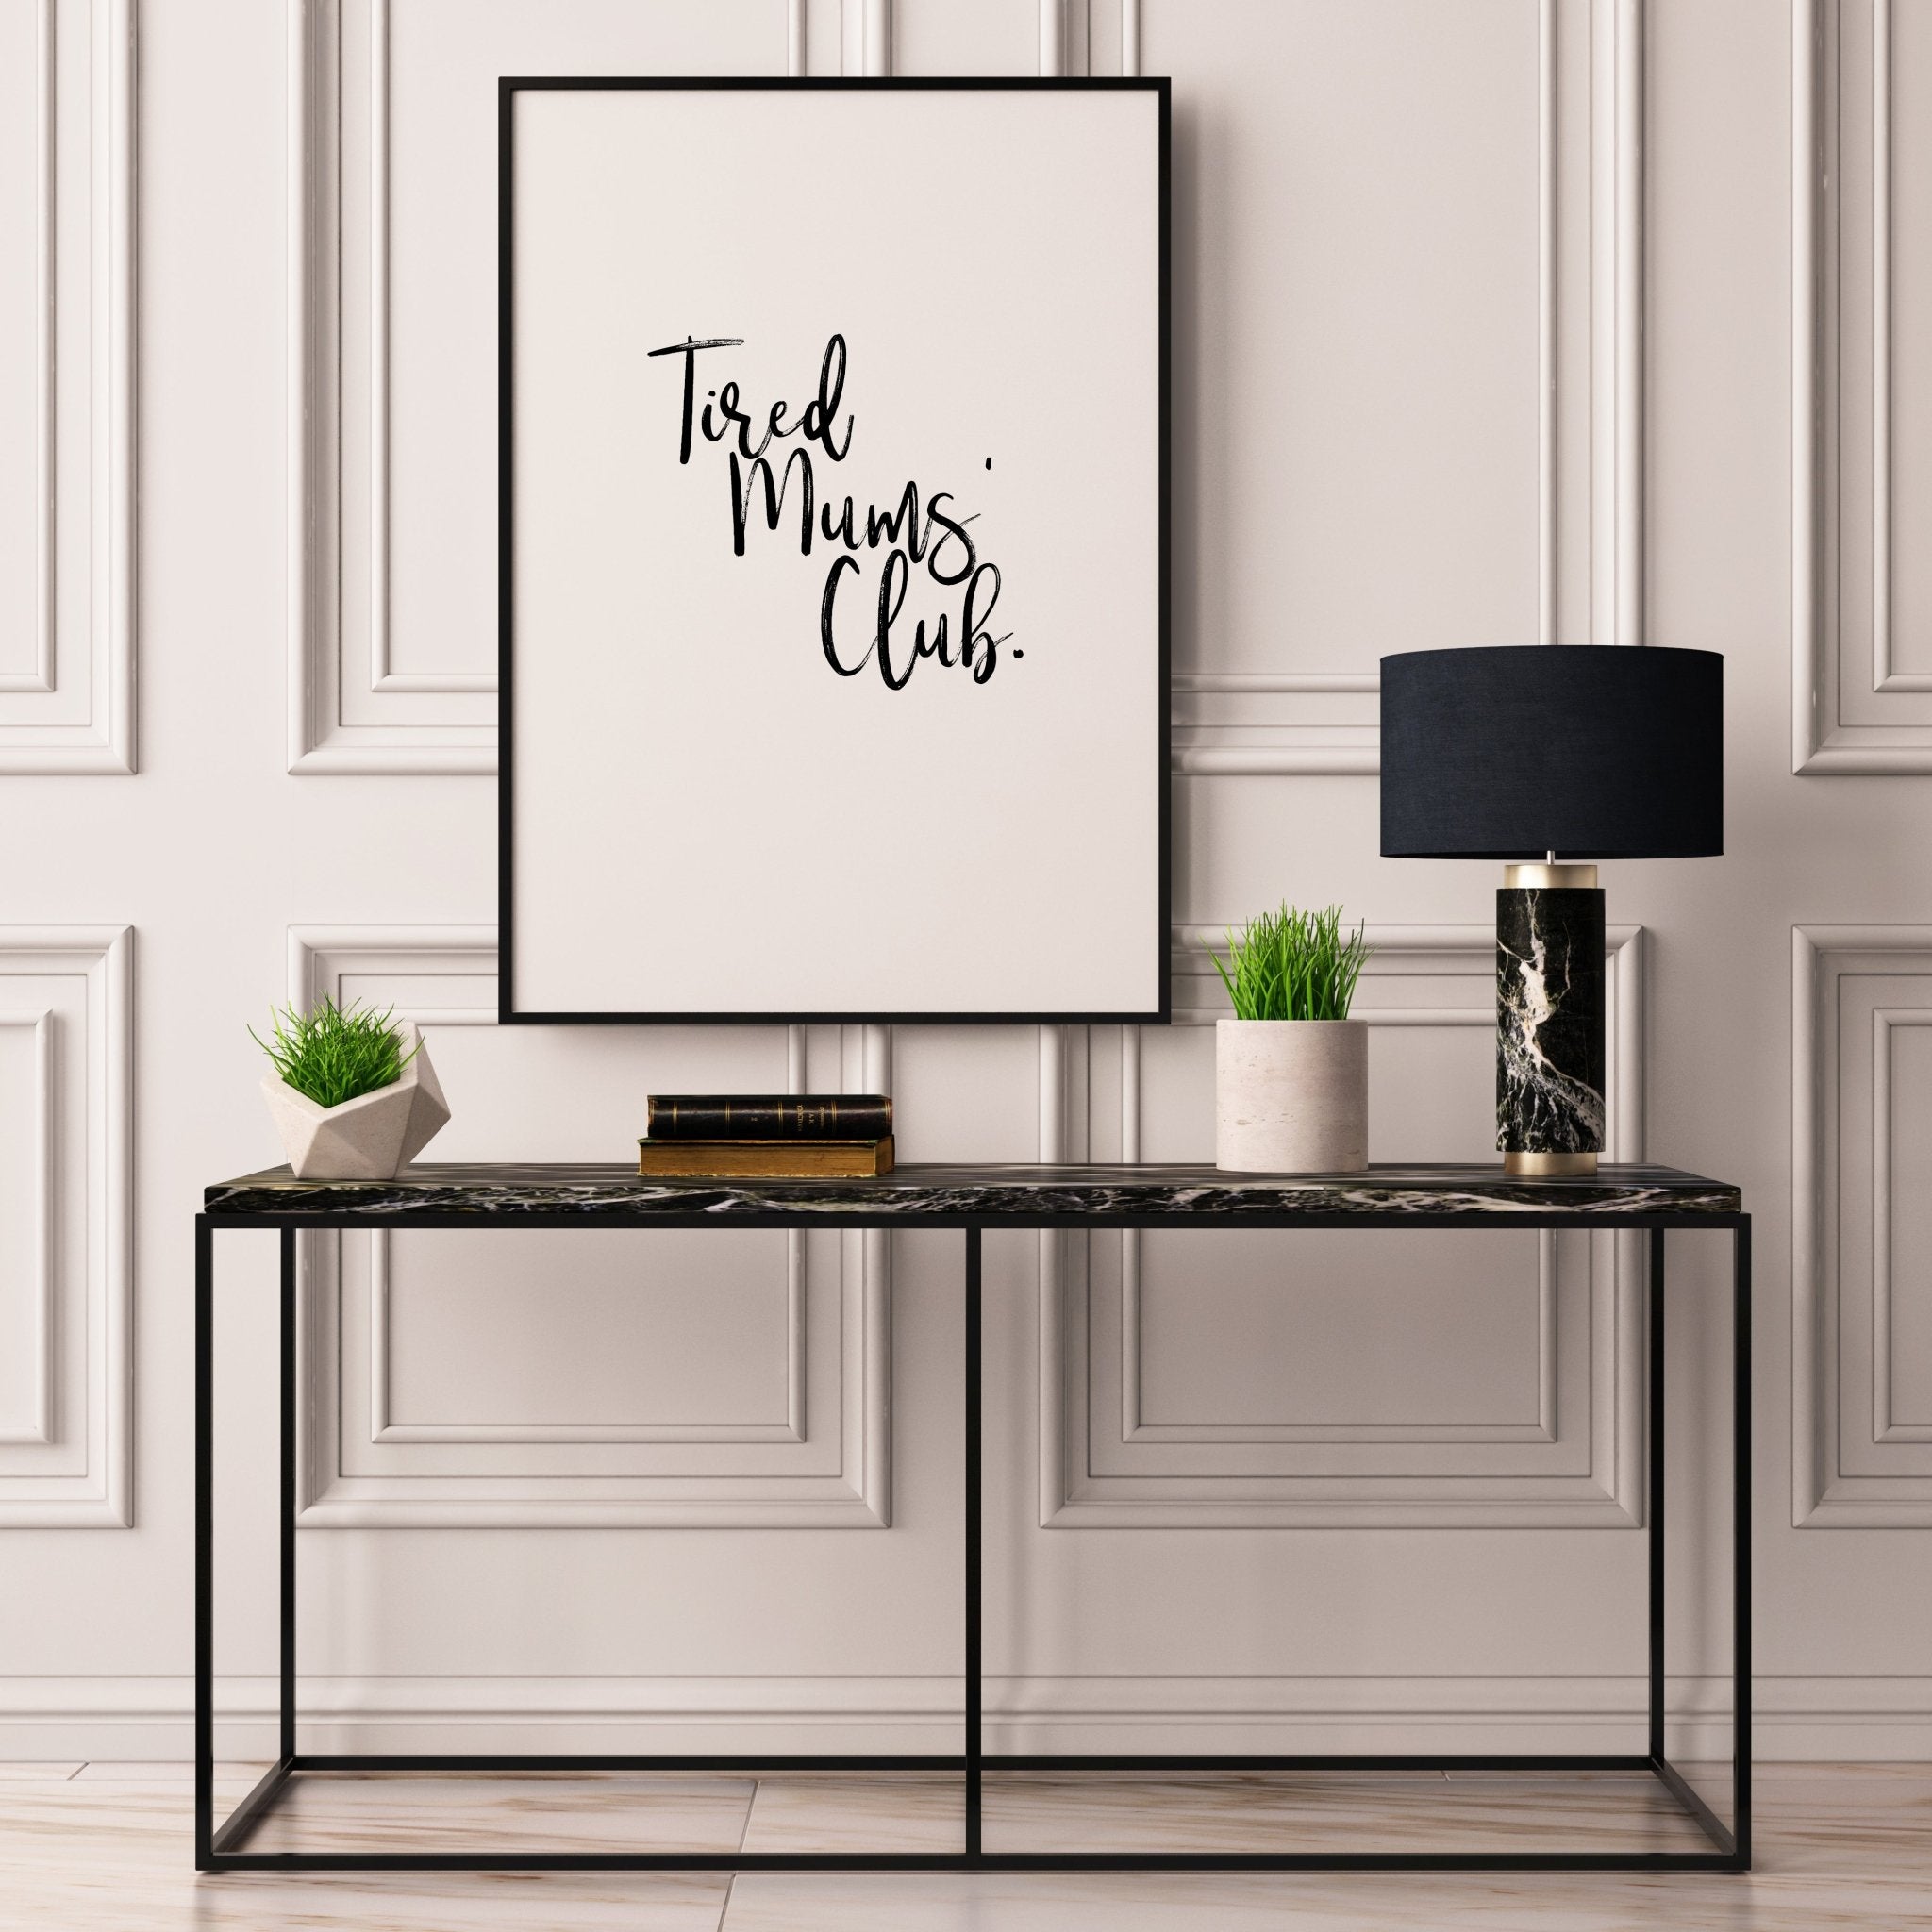 Tired Mums' Club - D'Luxe Prints